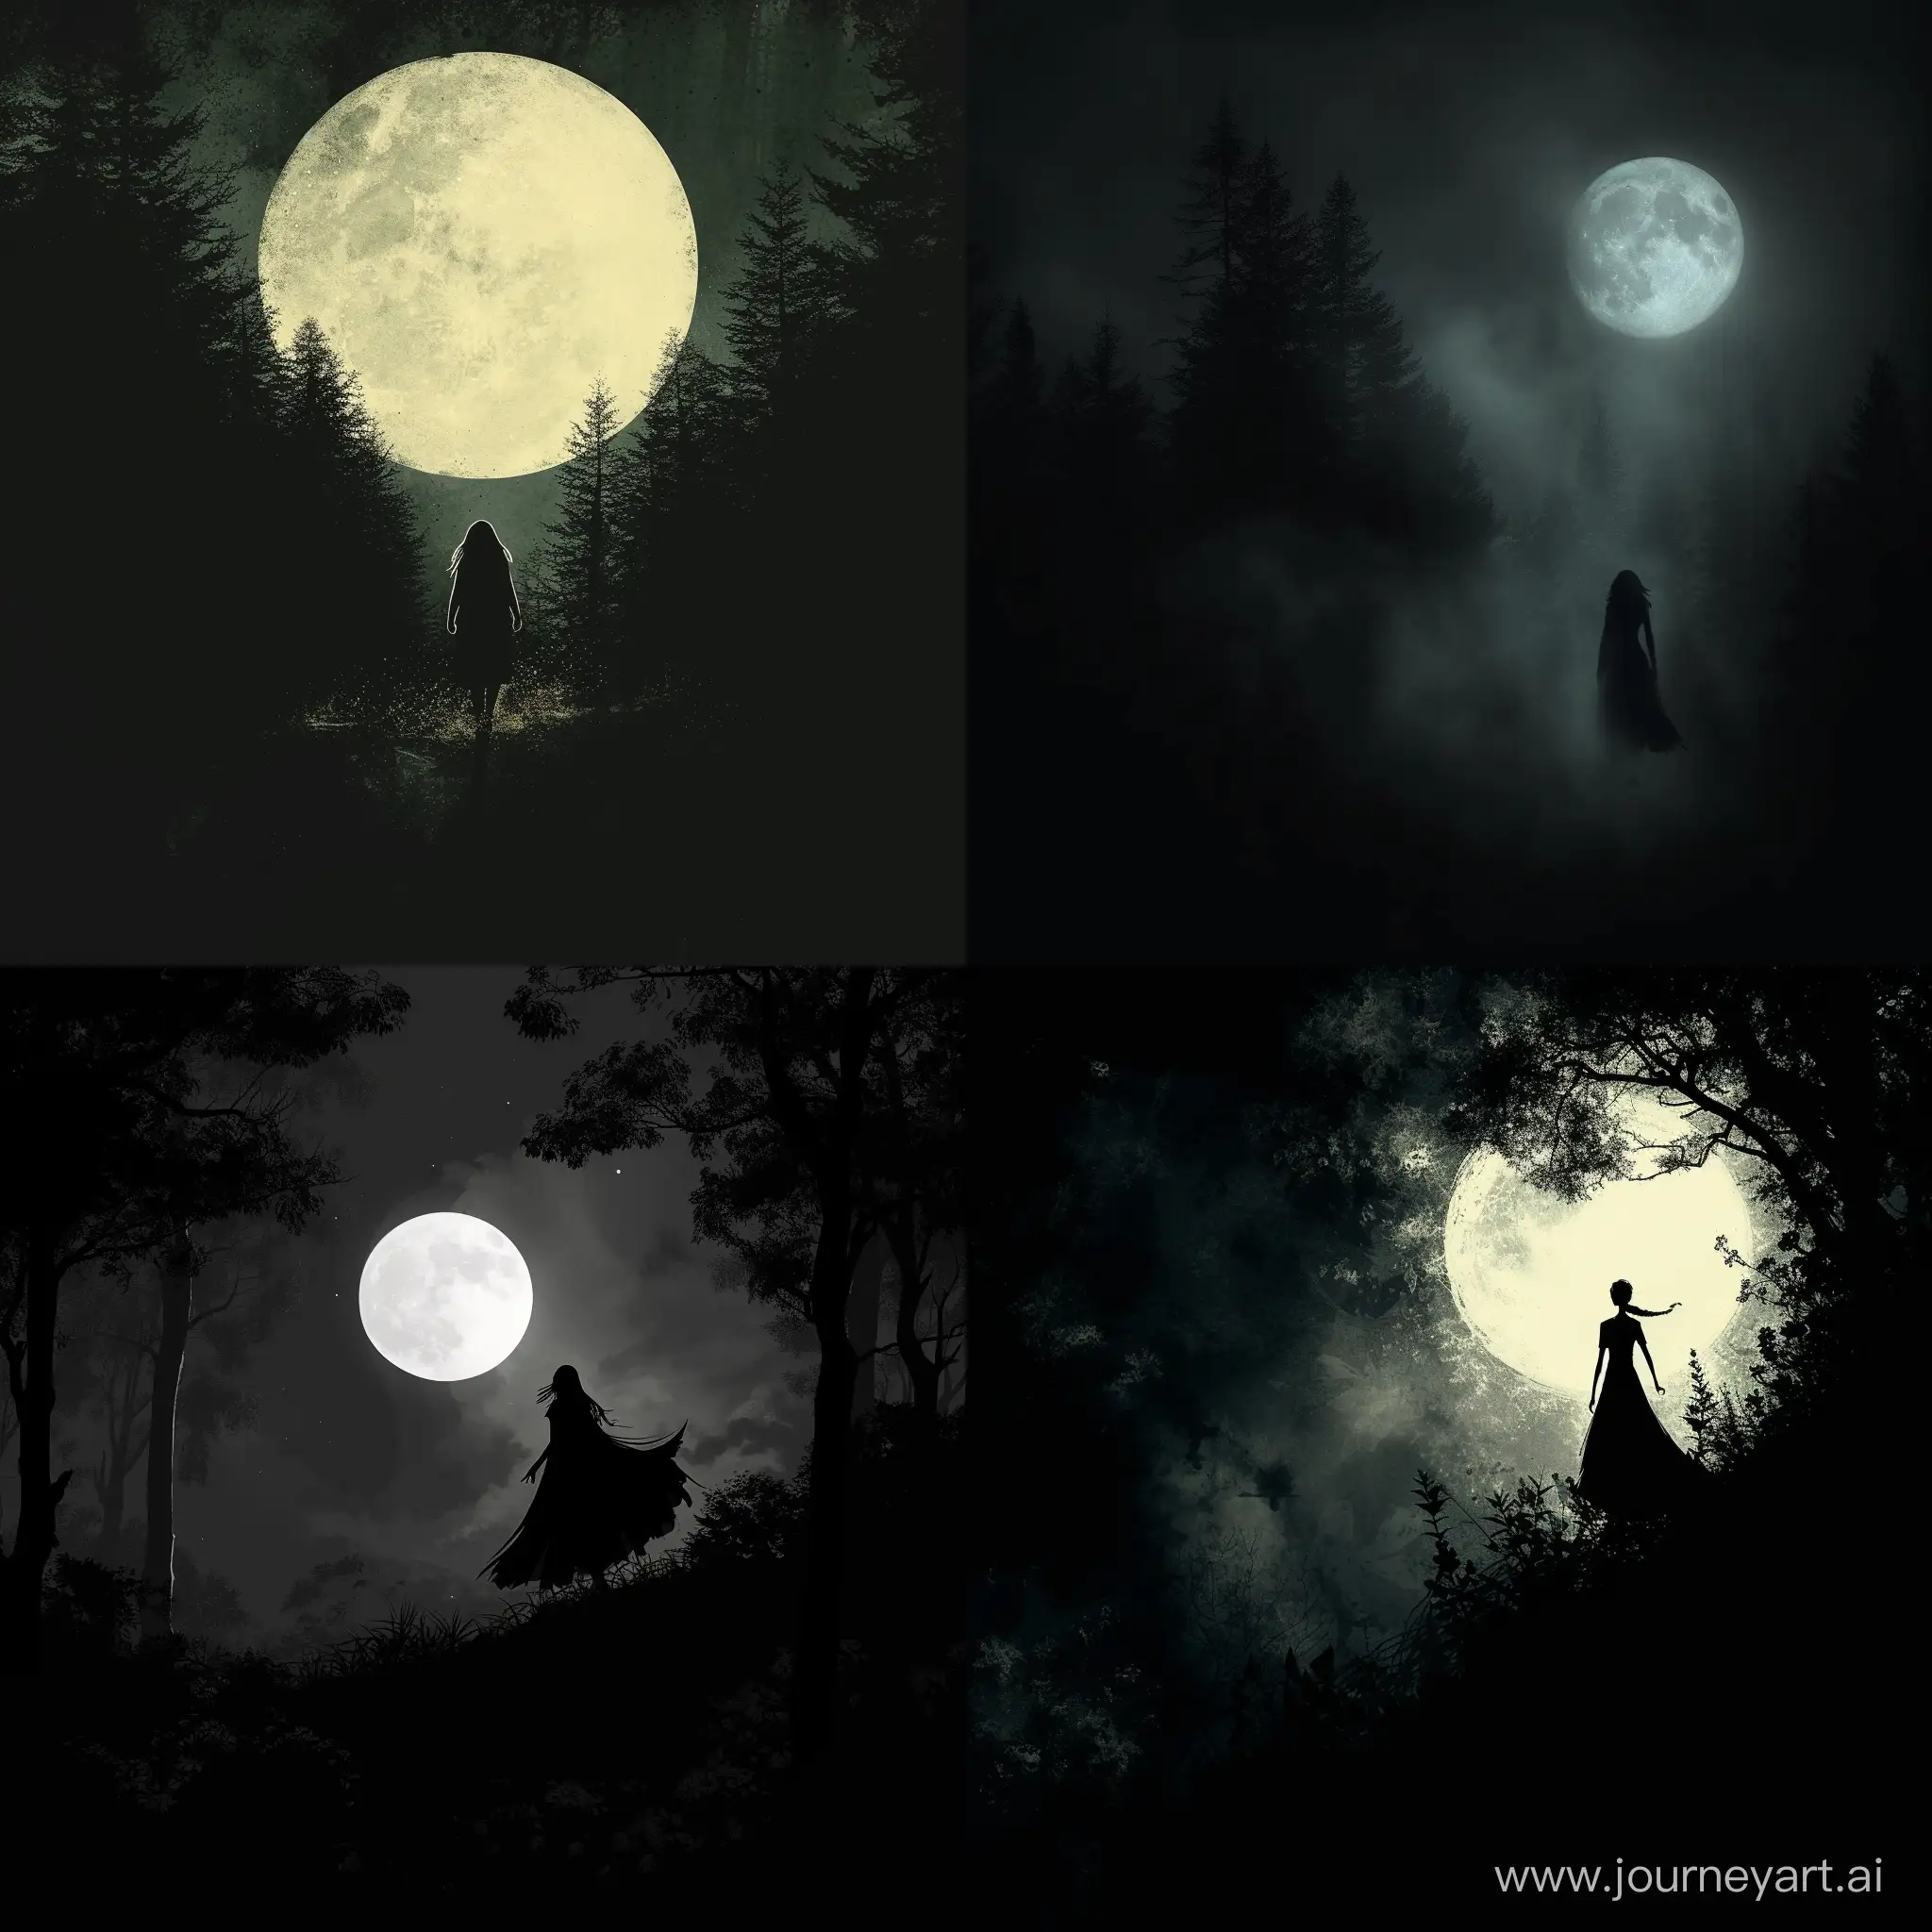 As the moon rises over the dark forest, a lone figure emerges from the shadows. She moves with grace and purpose, her features obscured by the darkness. Is she a protector of the forest or a harbinger of danger?